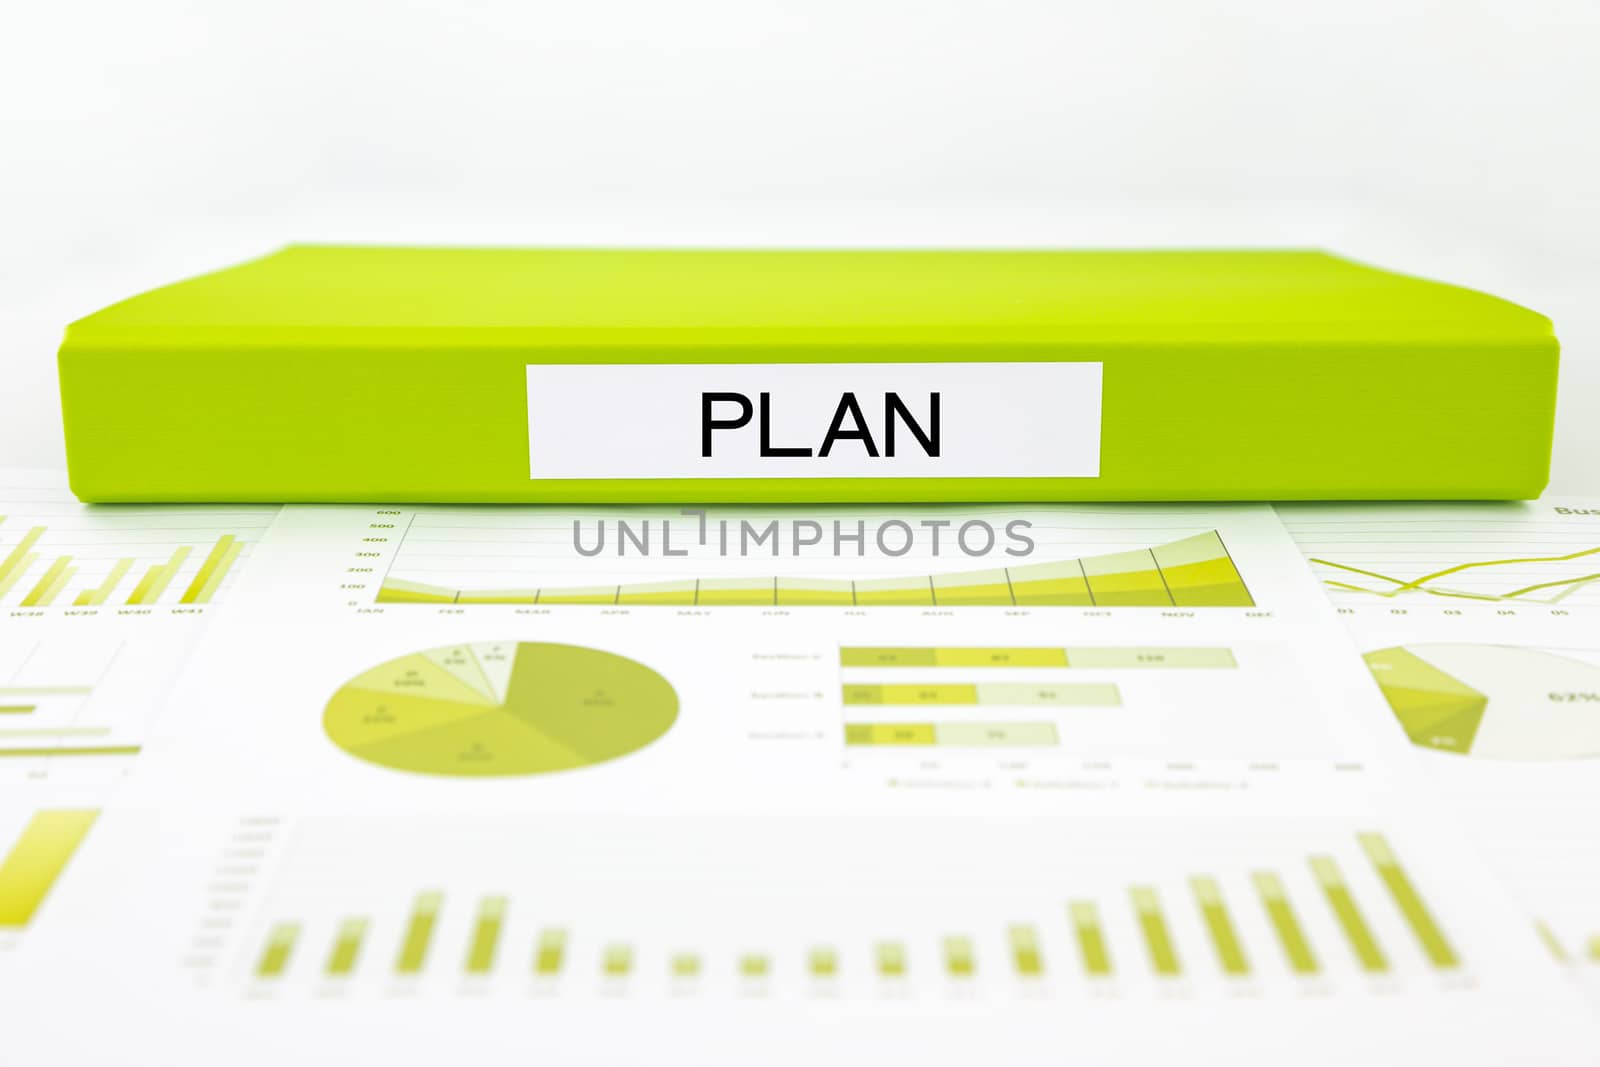 Strategic plan management with graphs, charts and data analysis by vinnstock